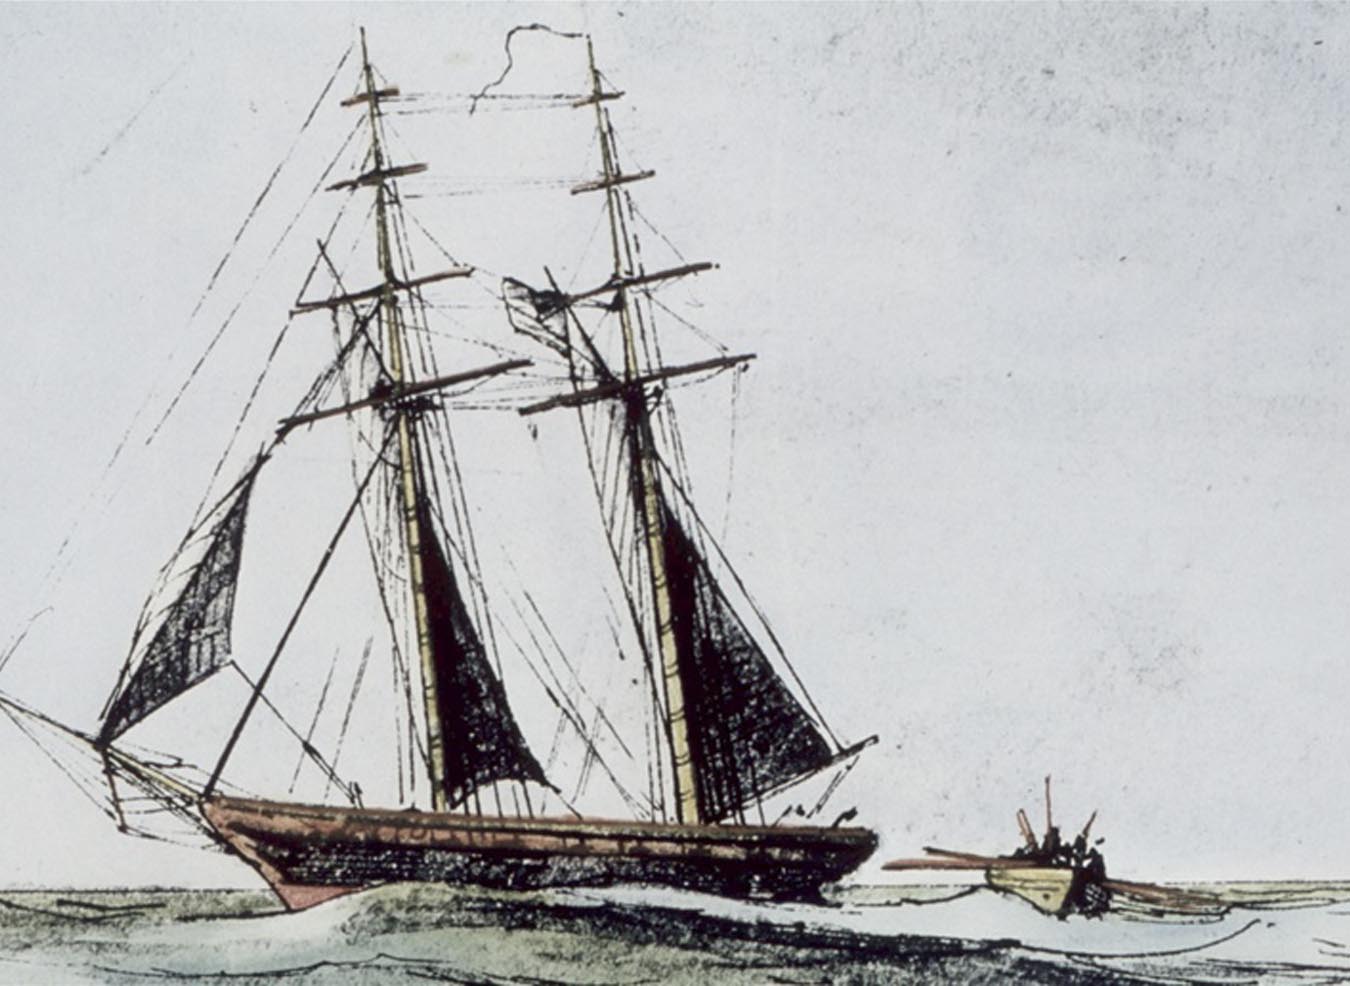 Image showing the first Coast Survey schooner, EXPERIMENT, a sounding boat used to measure depth from 1835 to 1839.